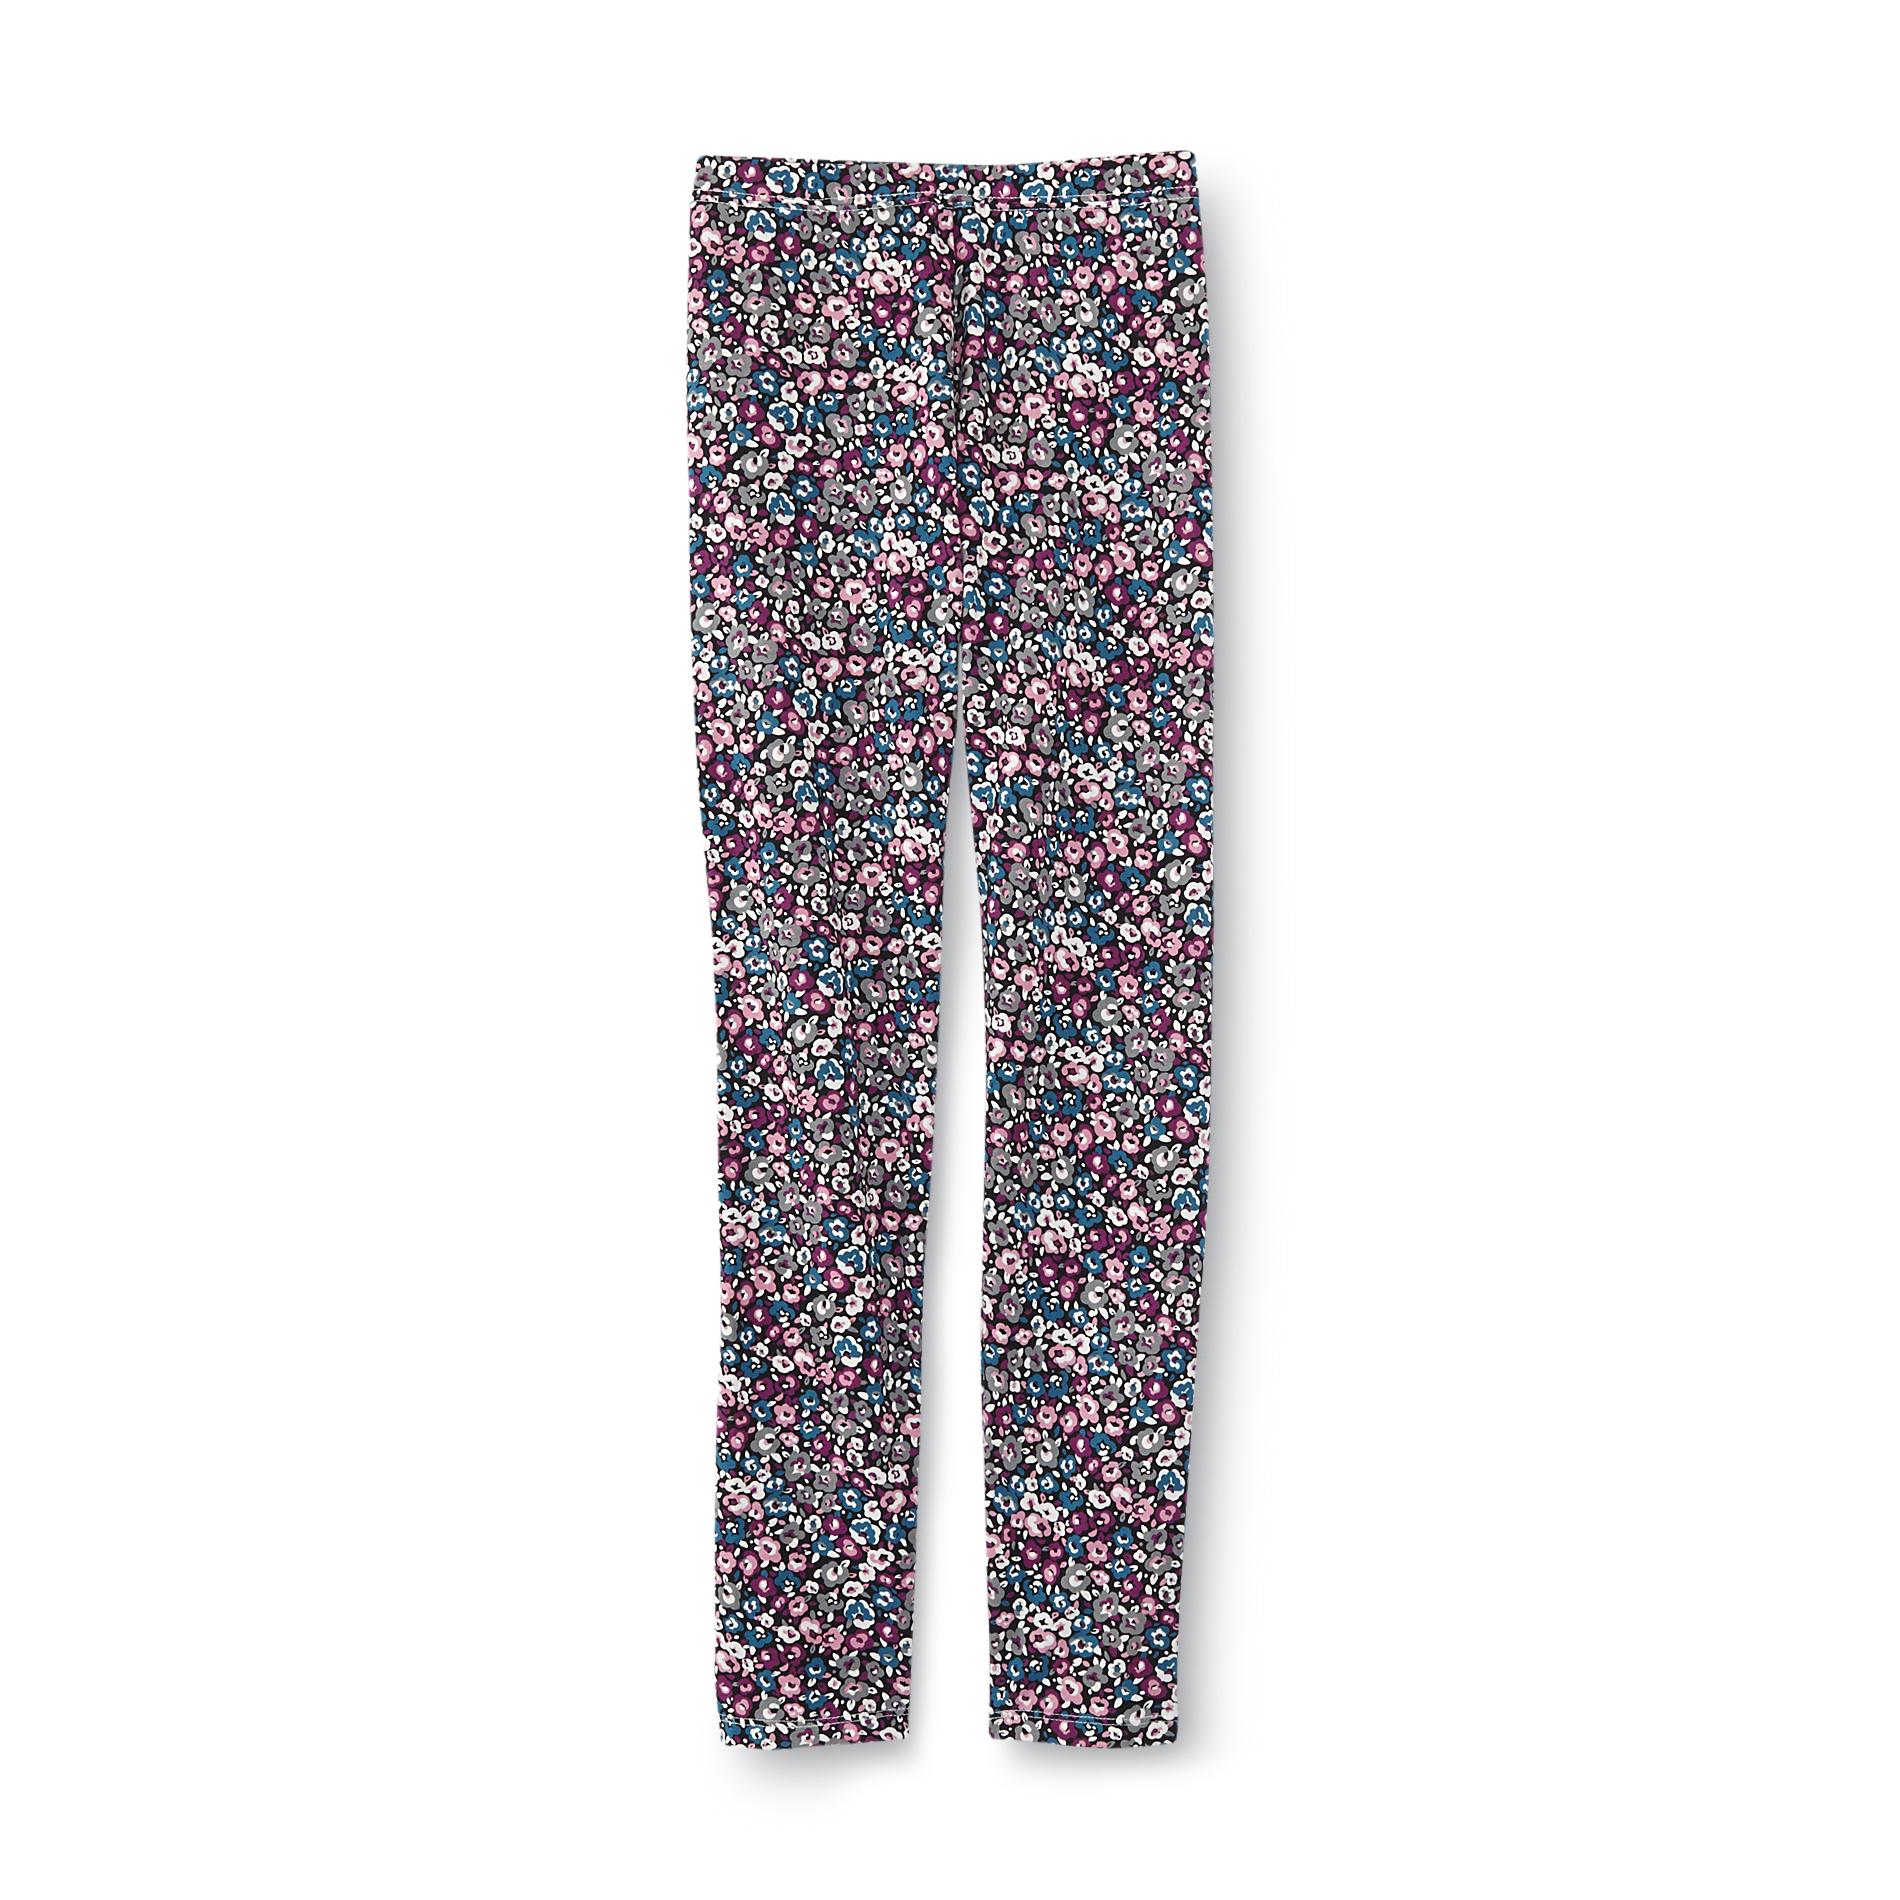 Simply Styled Girl's Seamless Leggings - Floral